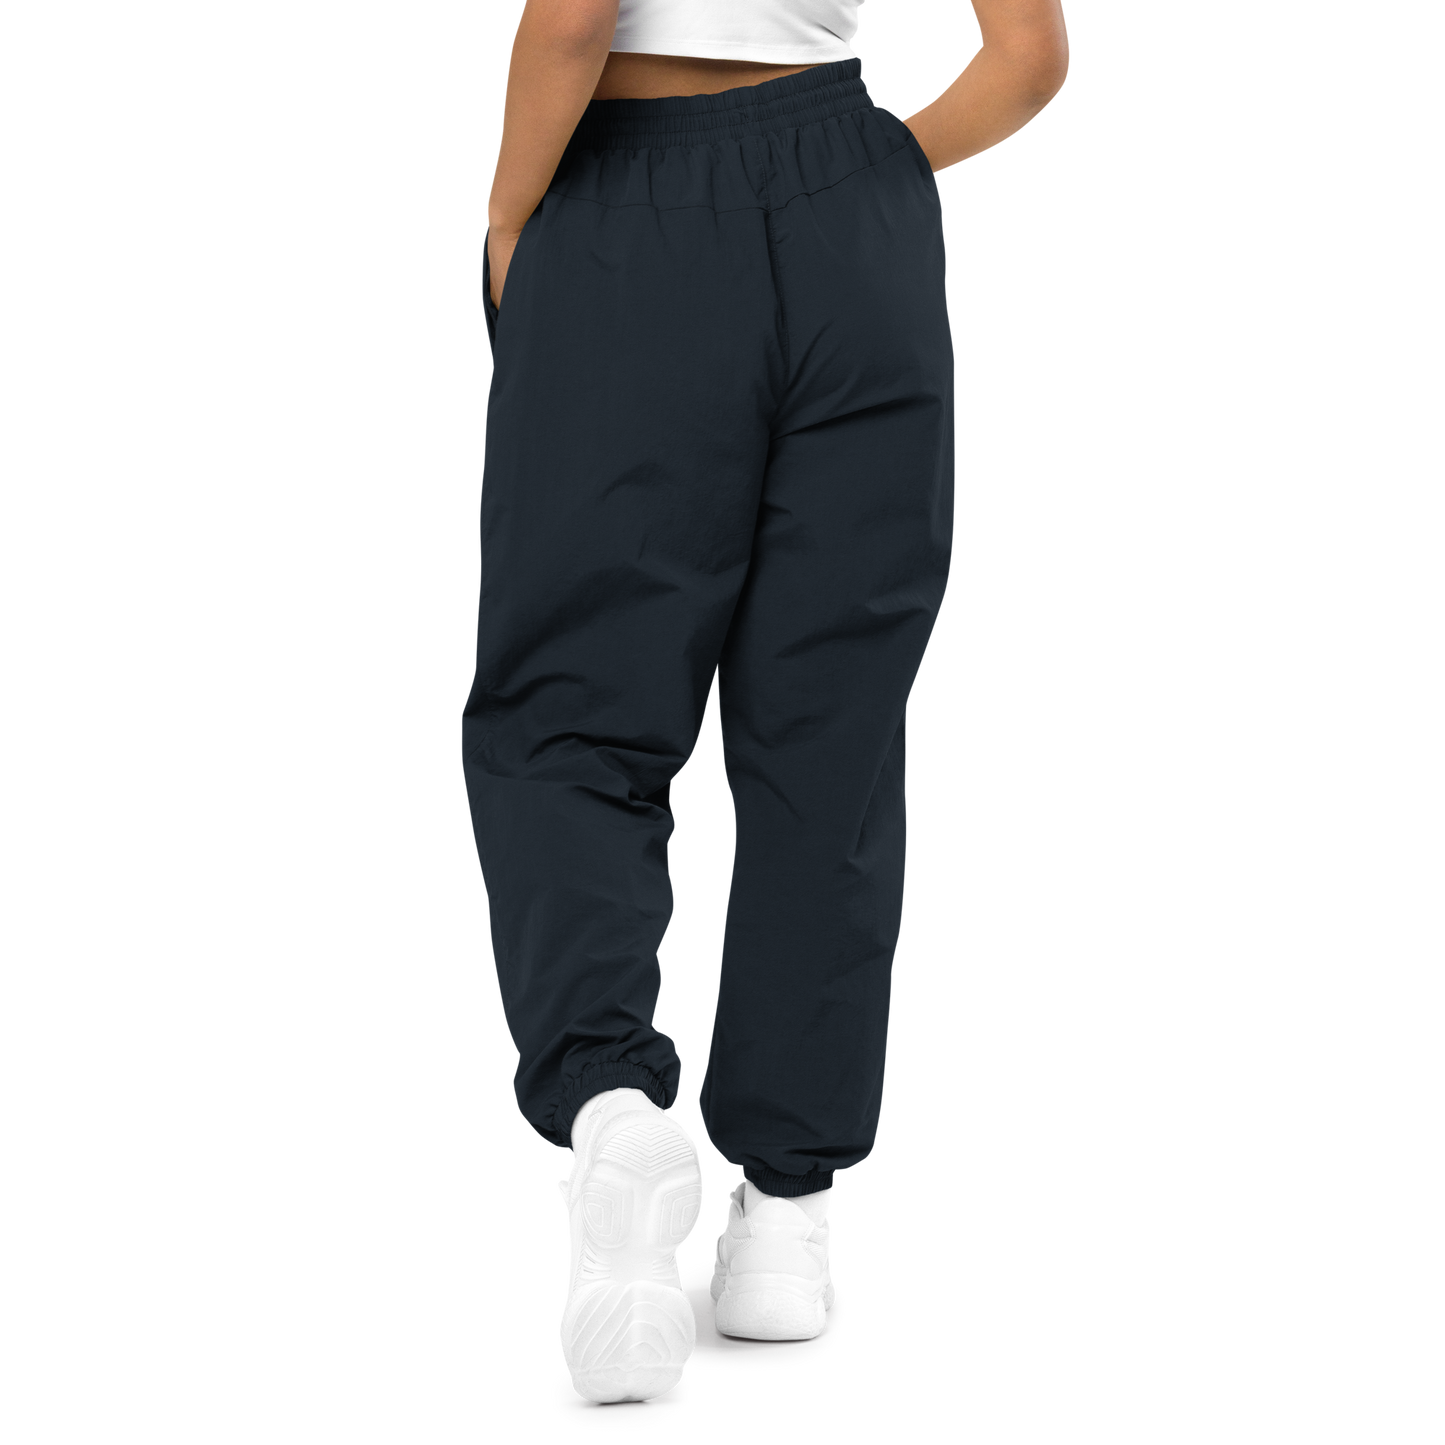 LUCKE Tracksuit Pants | Recycled Nylon & Polyester | Navy LUCK•E